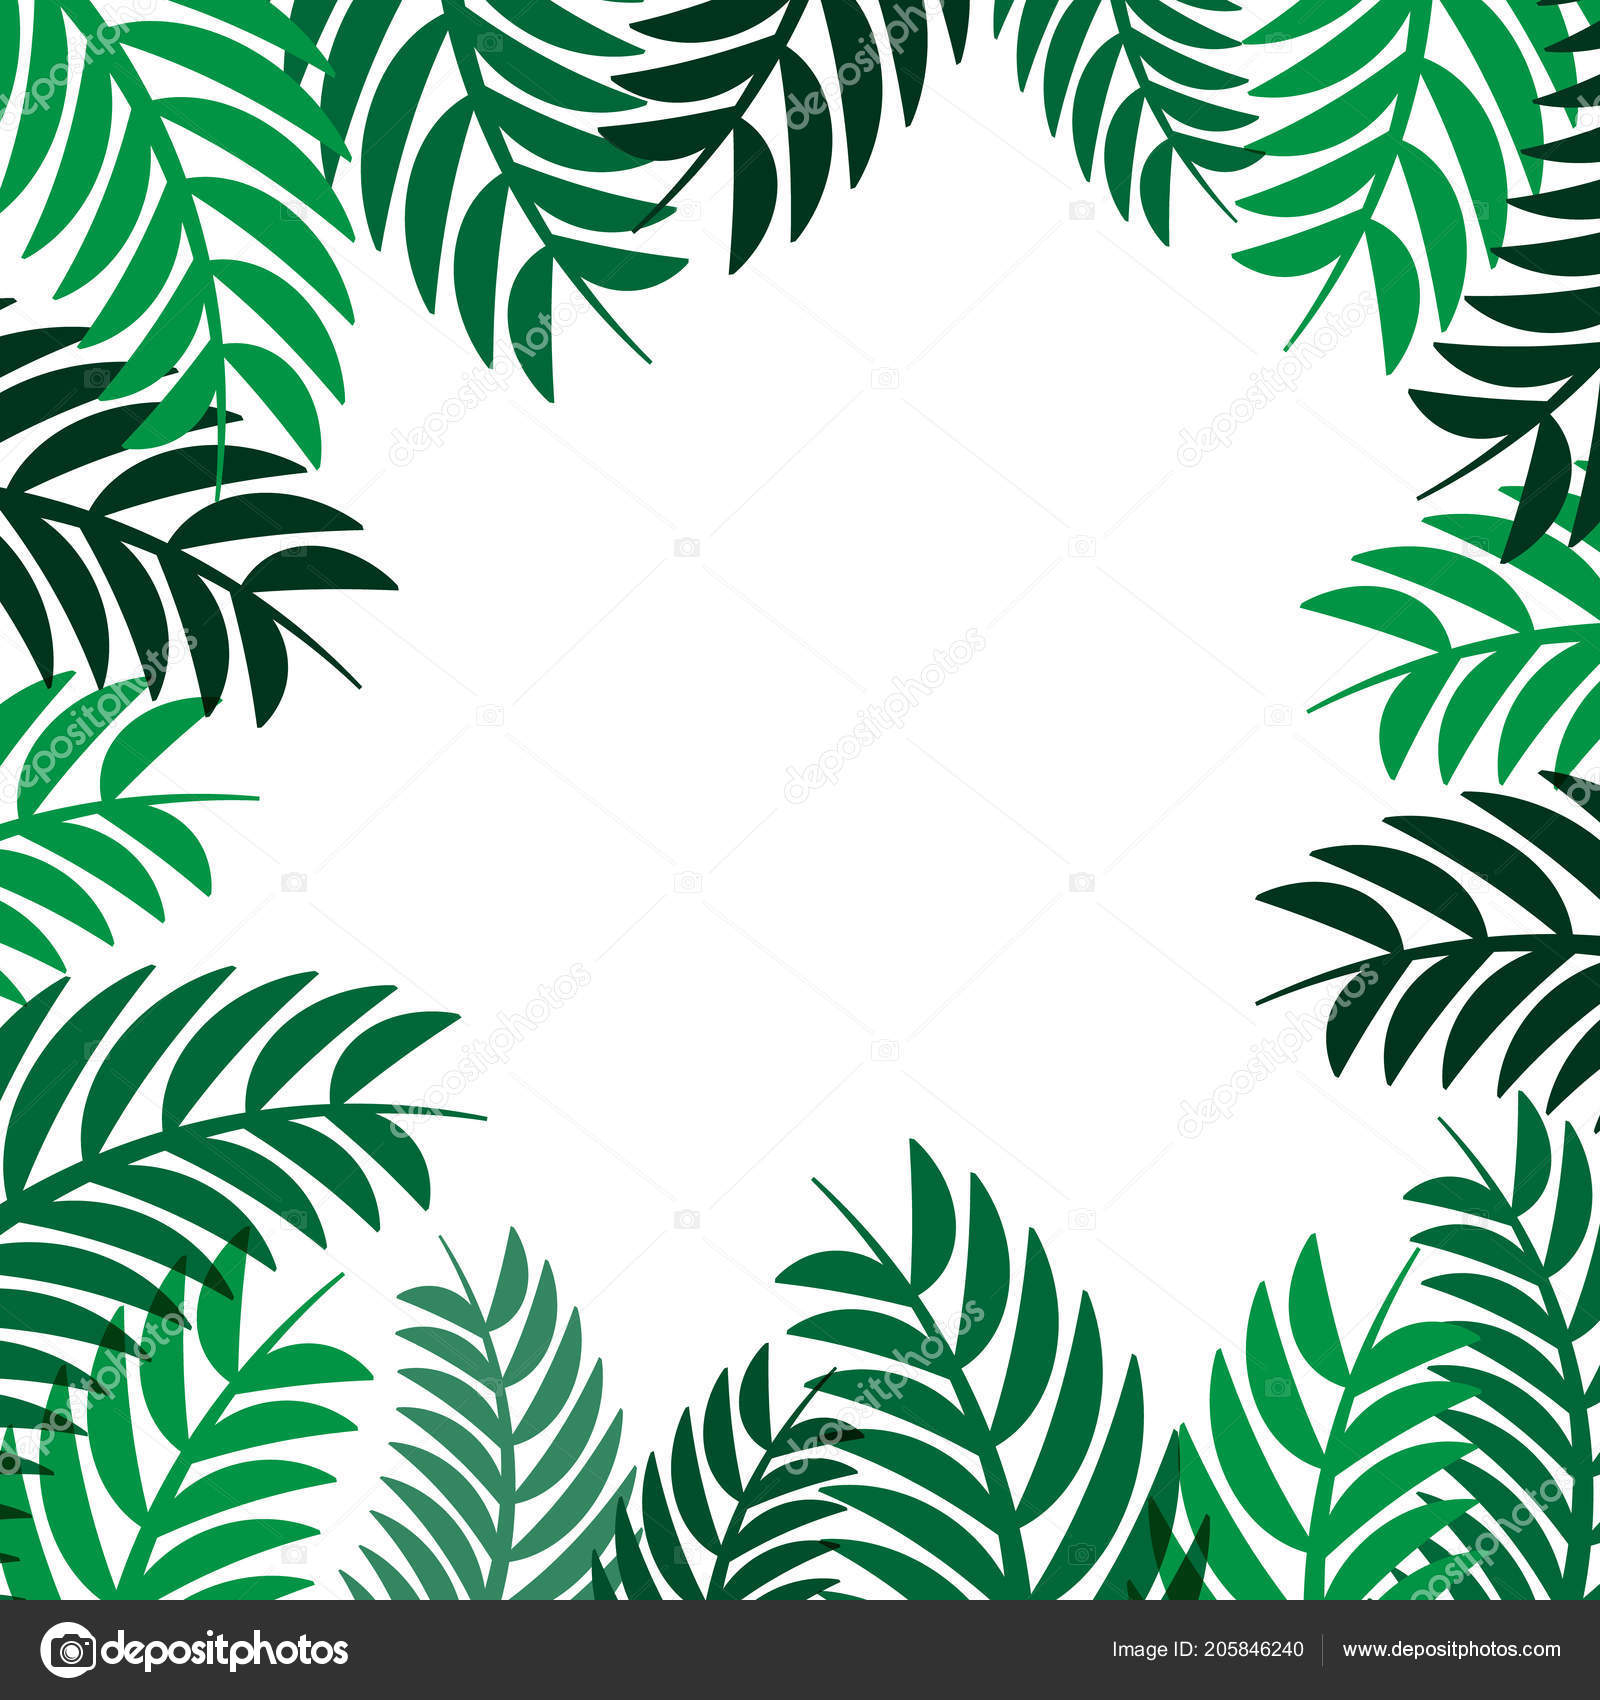 Green Leaves Frame Vector Nature Background Design Vector Image by ©Atinatstock #205846240